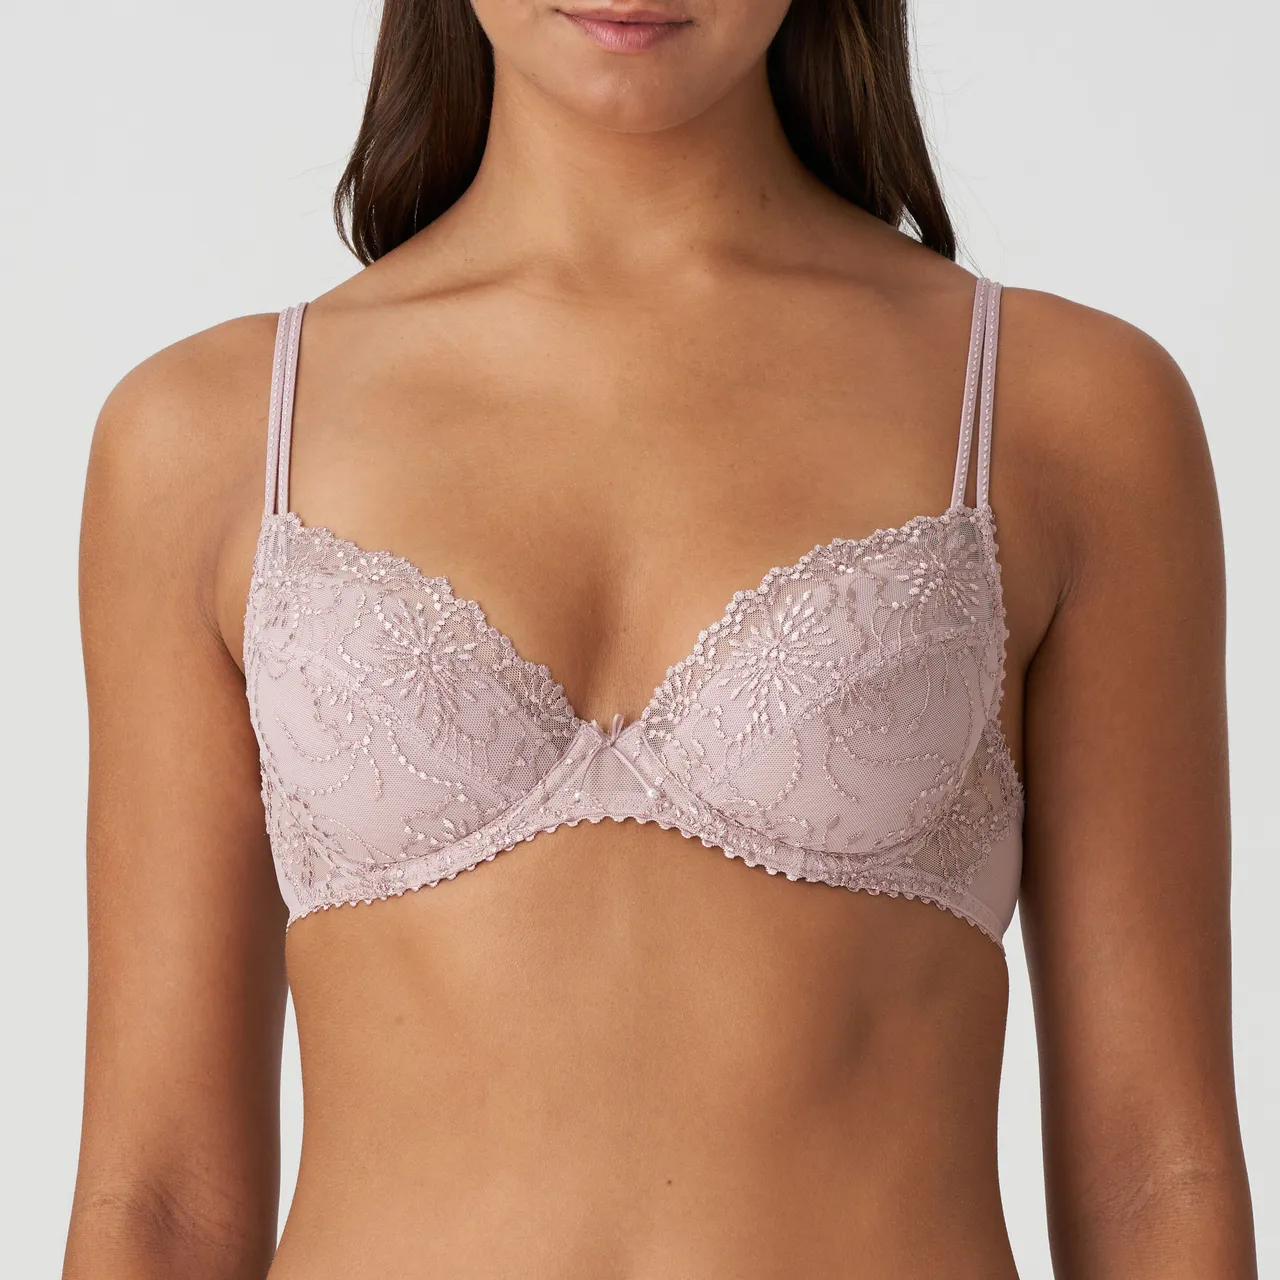 ᐅ Push-up bras • Large selection • 365-day right of return